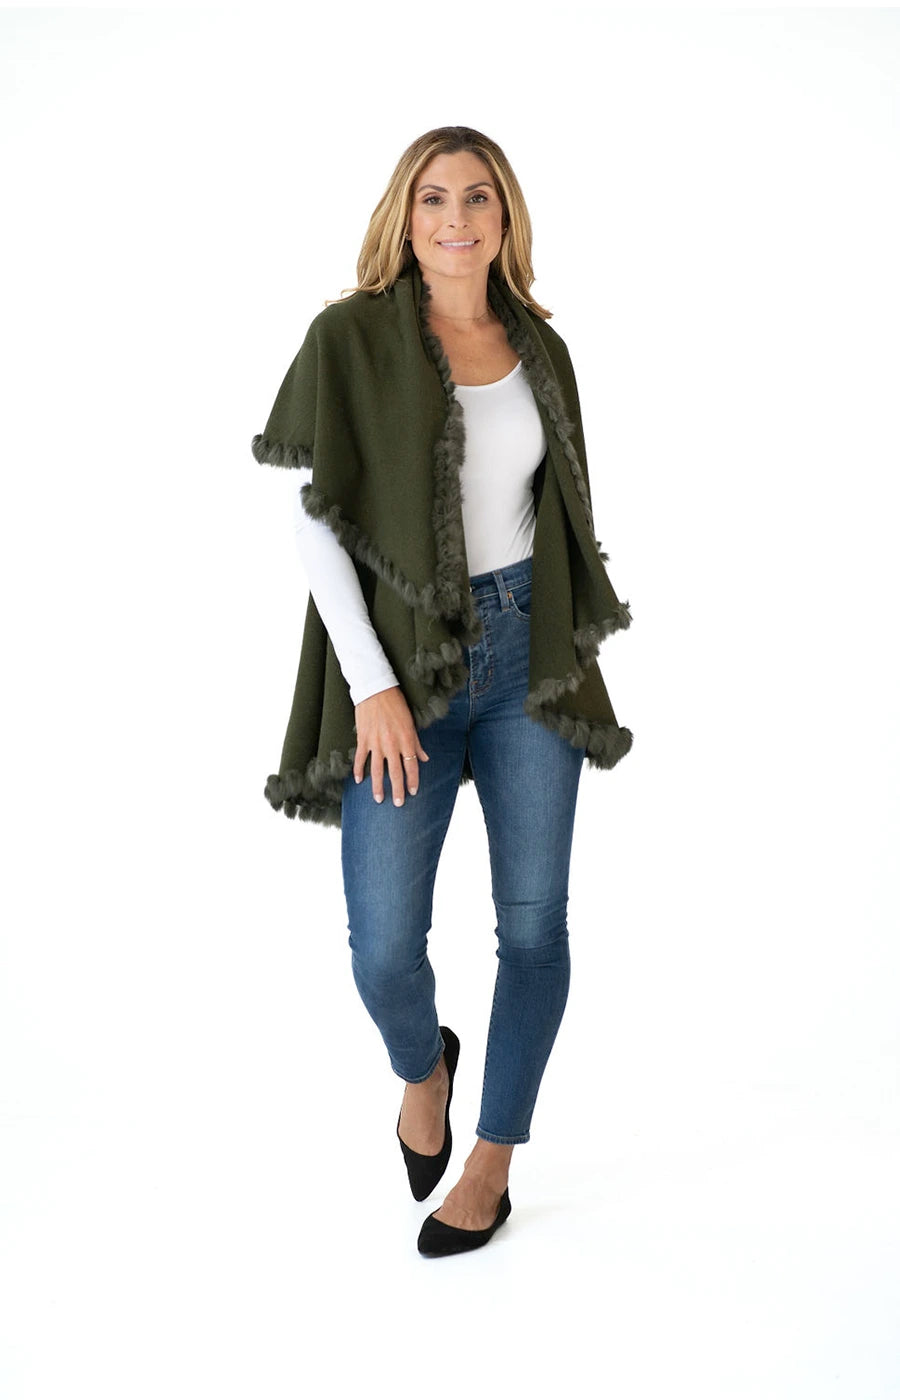 Multi Style Shawl Wrap in Olive Green with Fur Trim